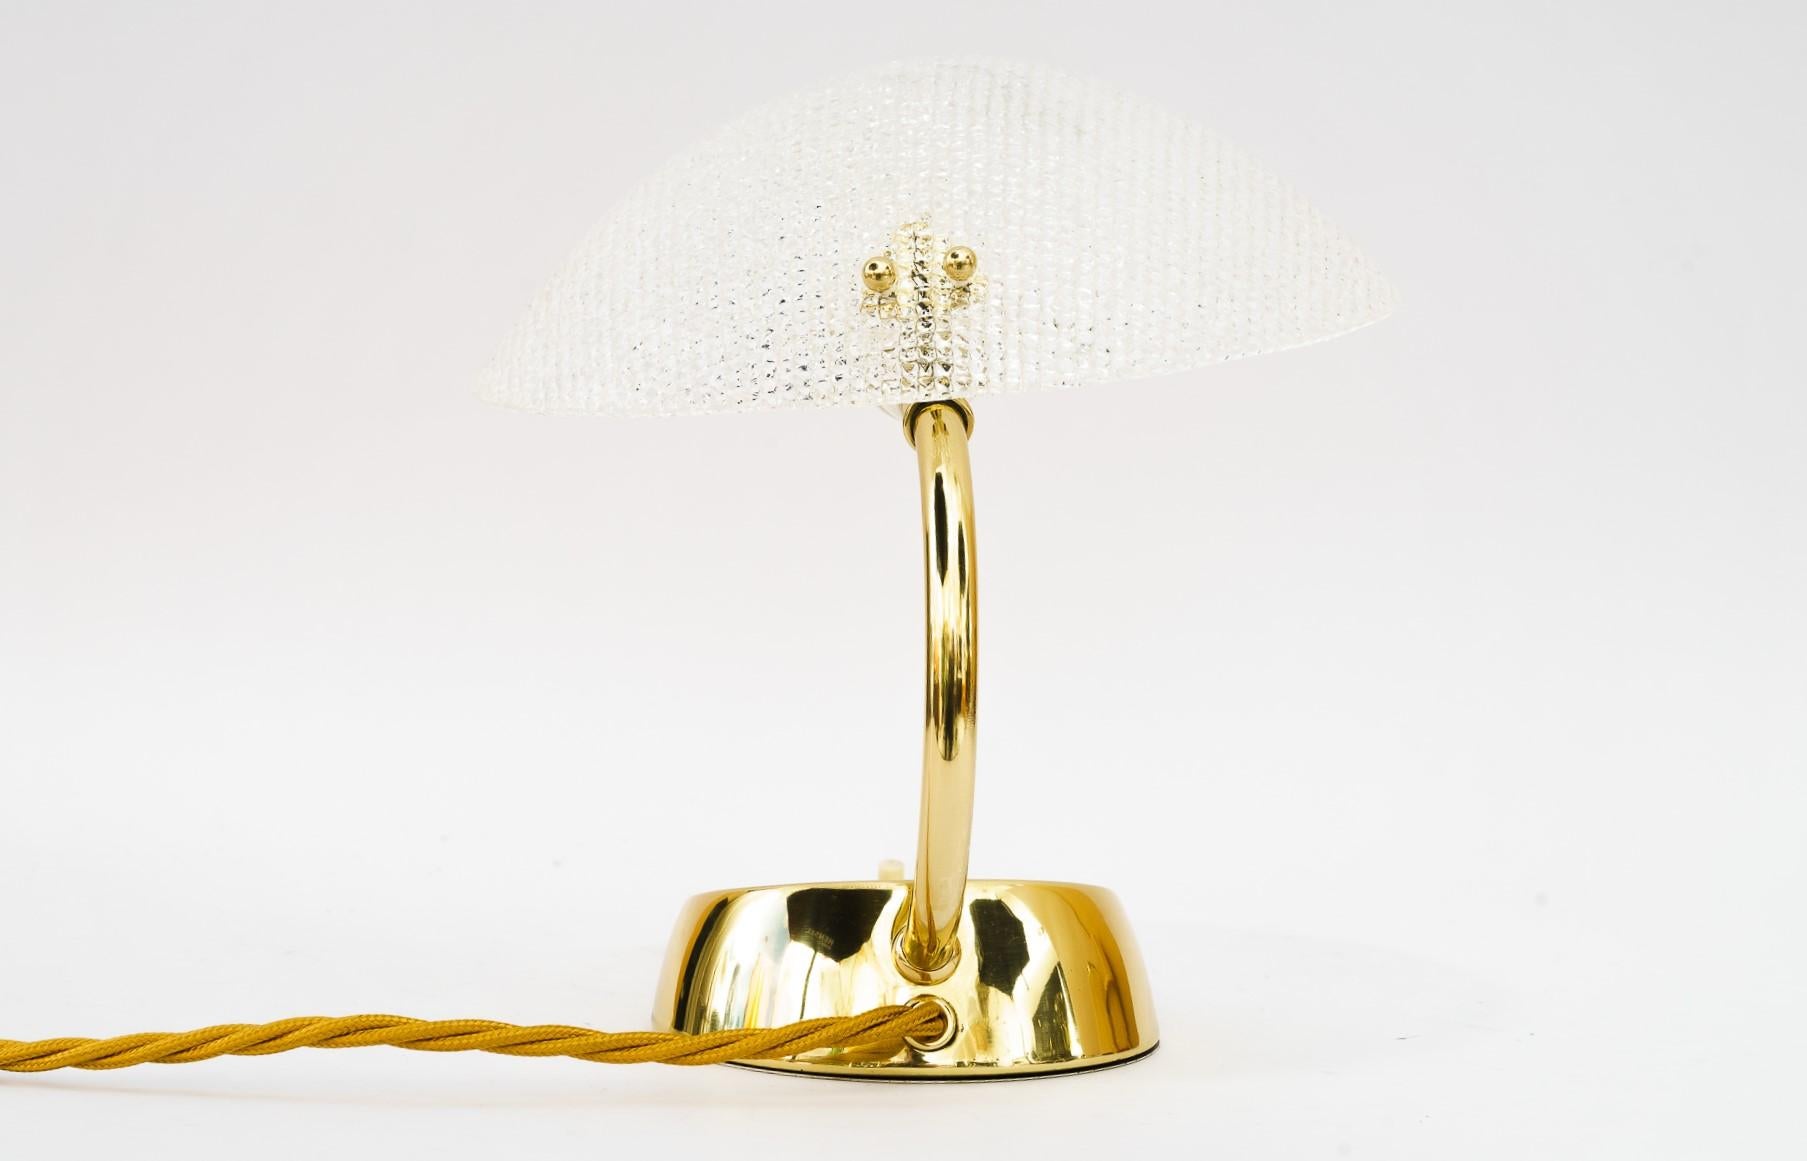 Rupert nikoll table lamp with lucite shade vienna around 1960s
Brass polished and stove enameled
